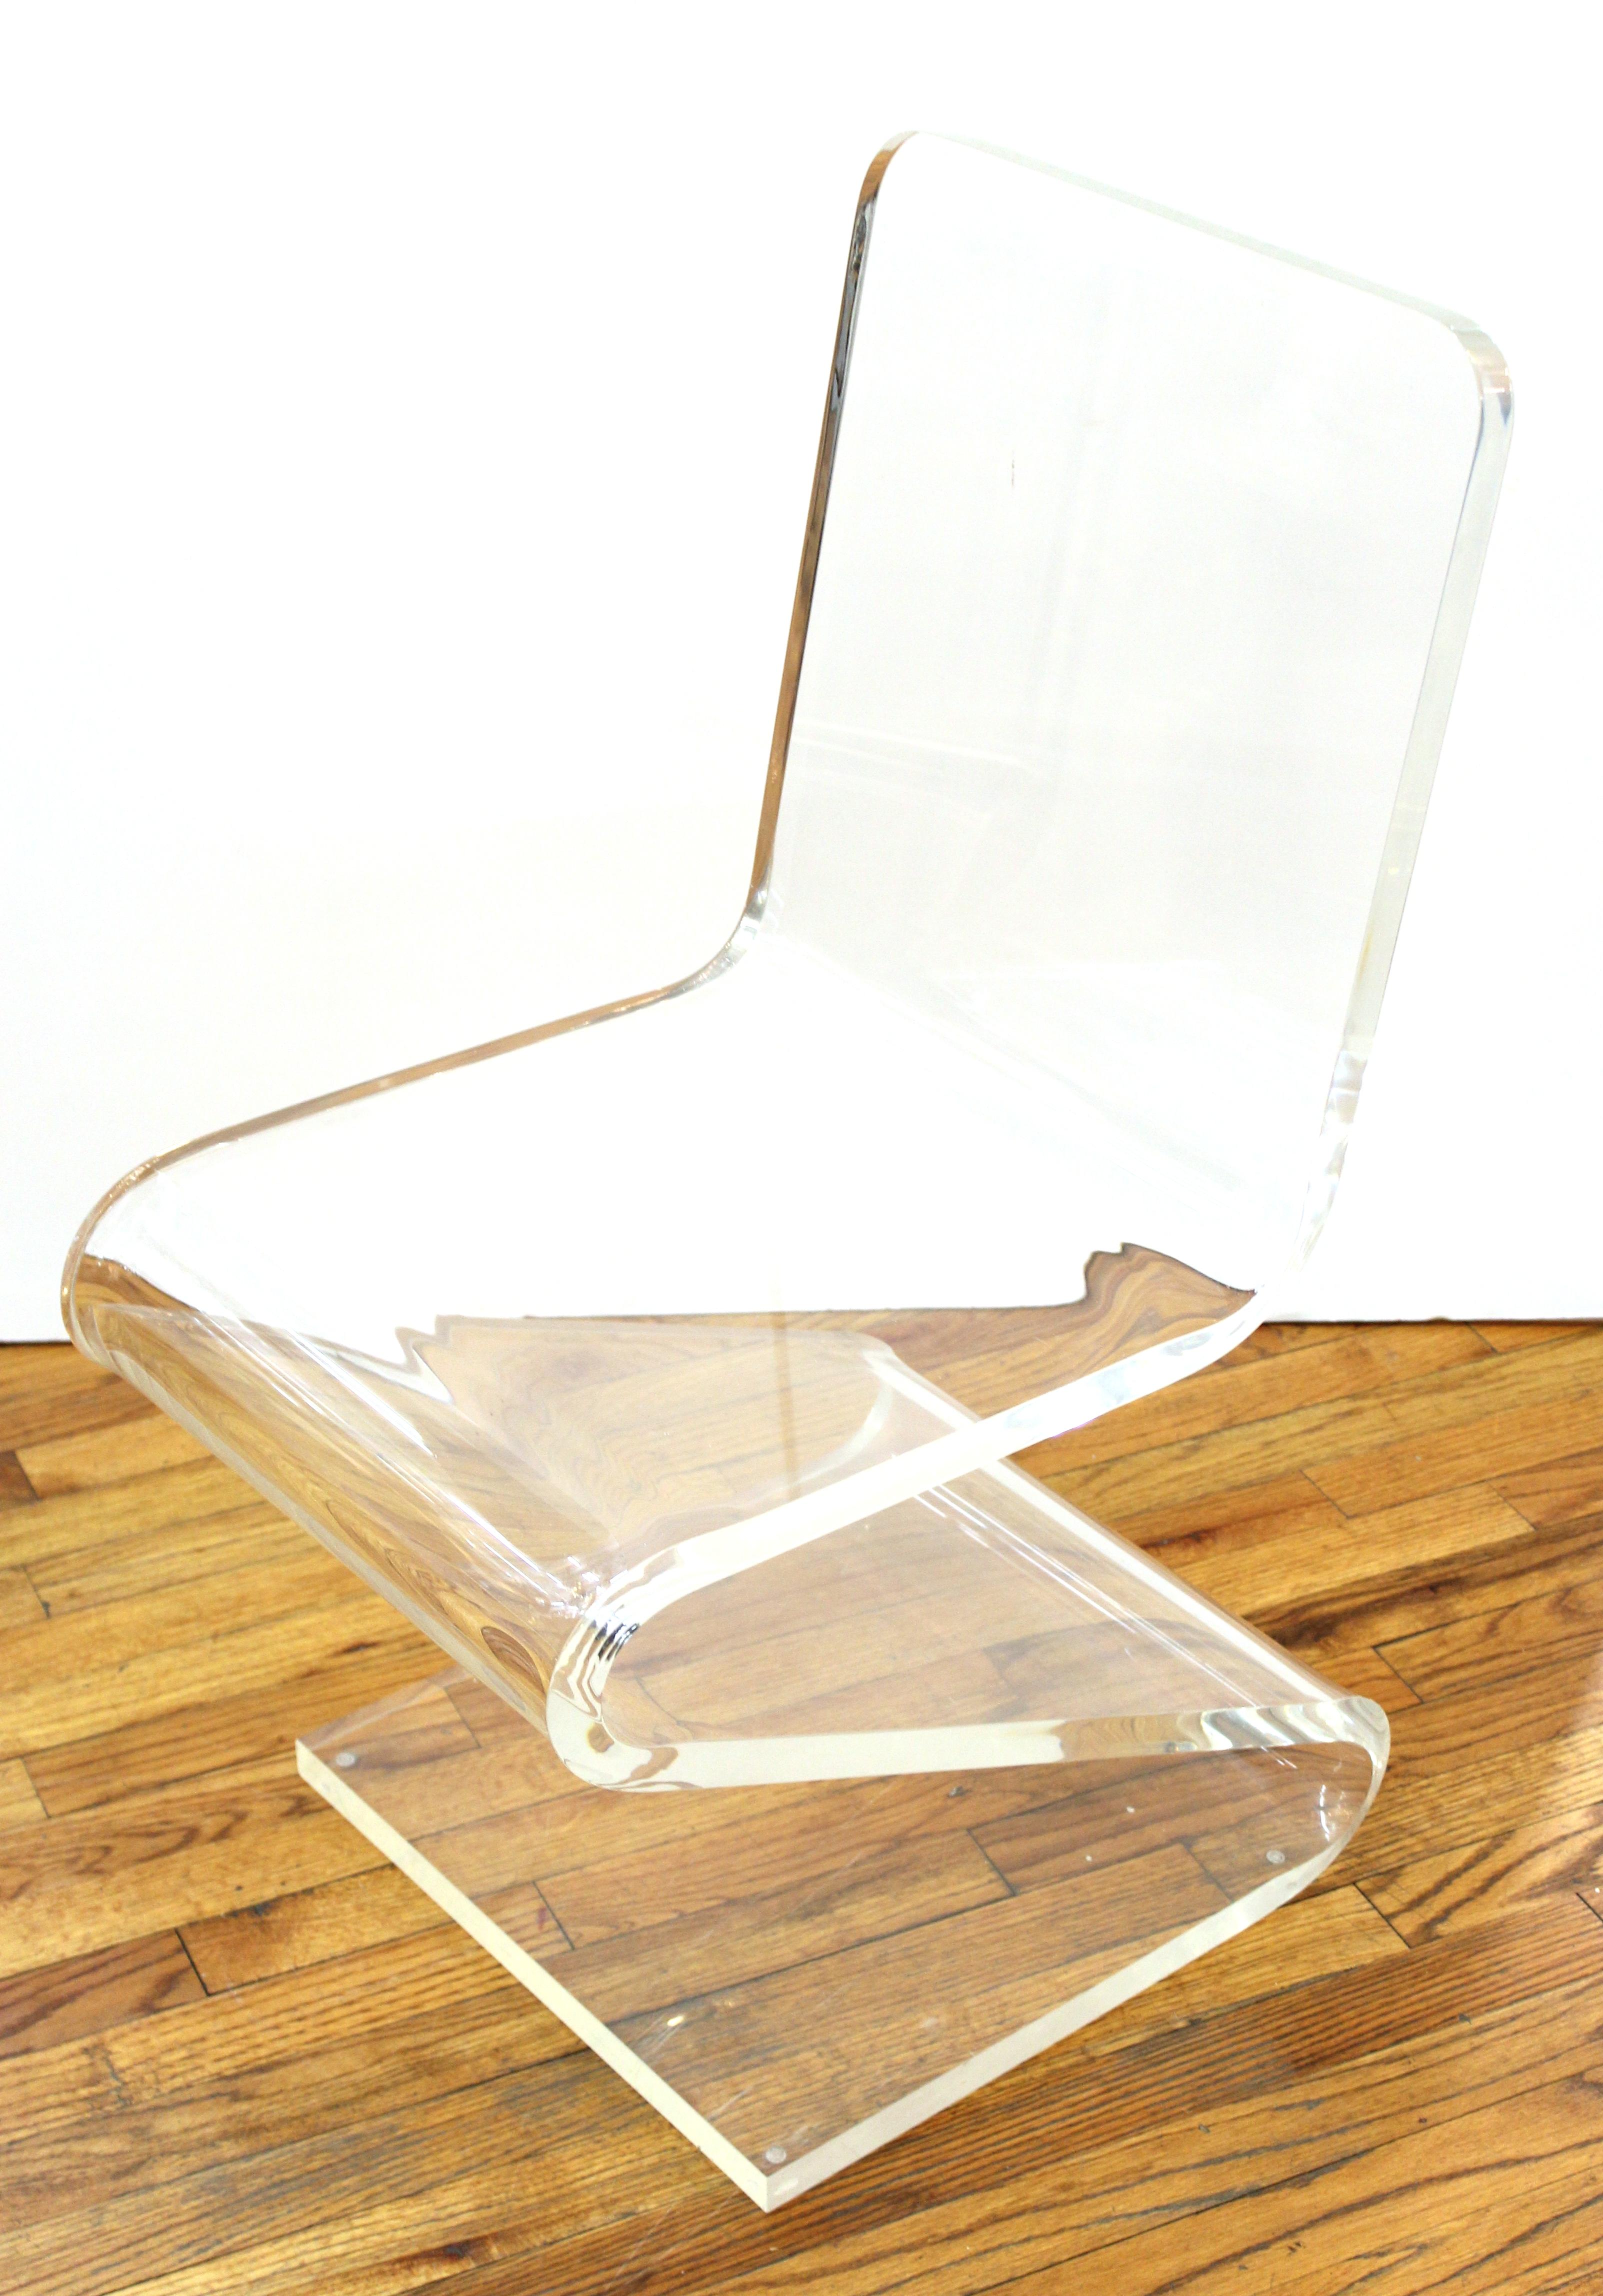 Modern Lucite 'Z' cantilever side chair or desk chair, in style of Les Prismatiques.